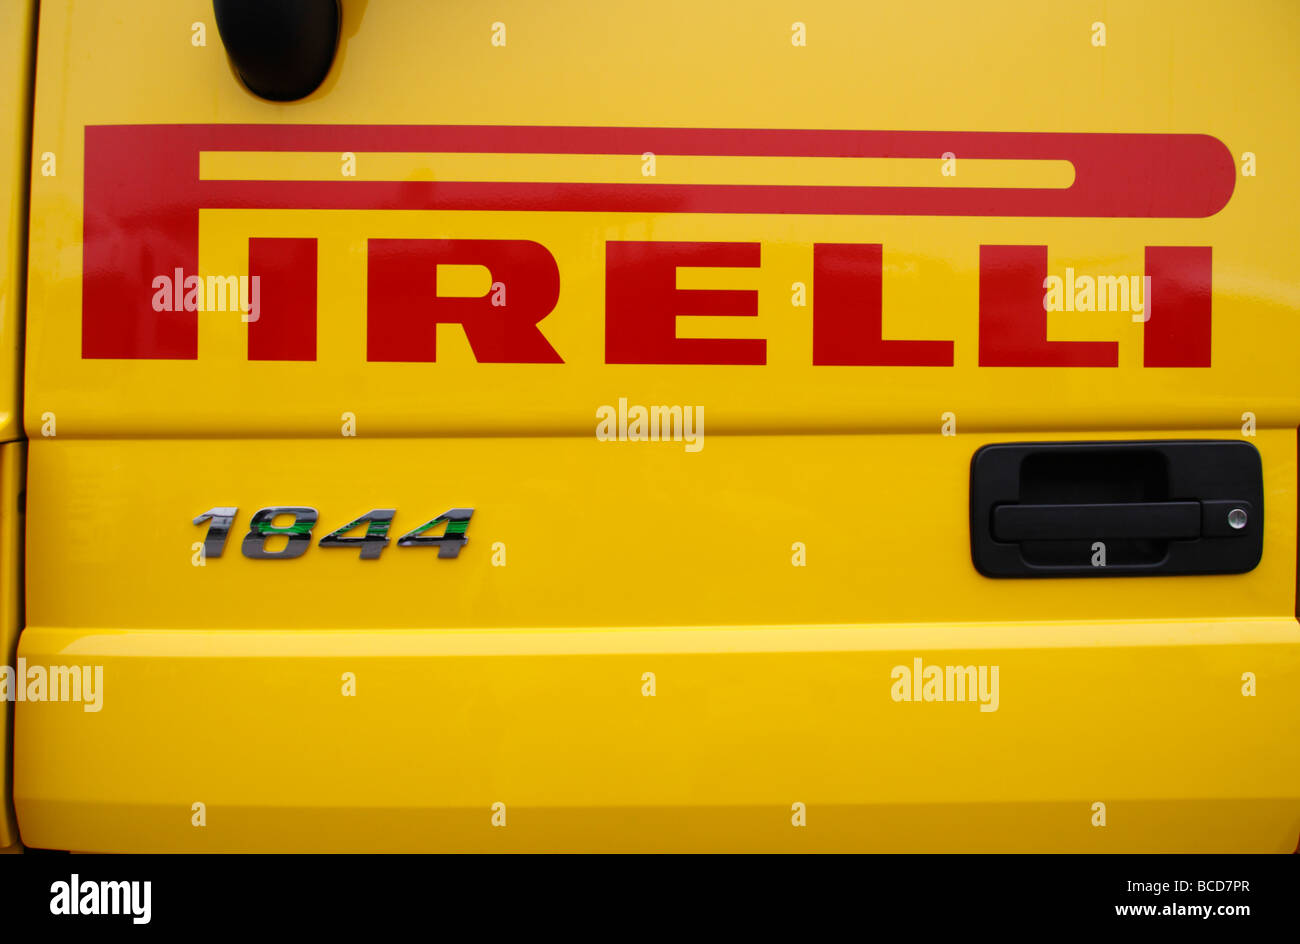 The Pirelli Tyre Co. brand on the door of a tyre truck at the World Superbike Championships, Donington Park, Derbyshir Stock Photo